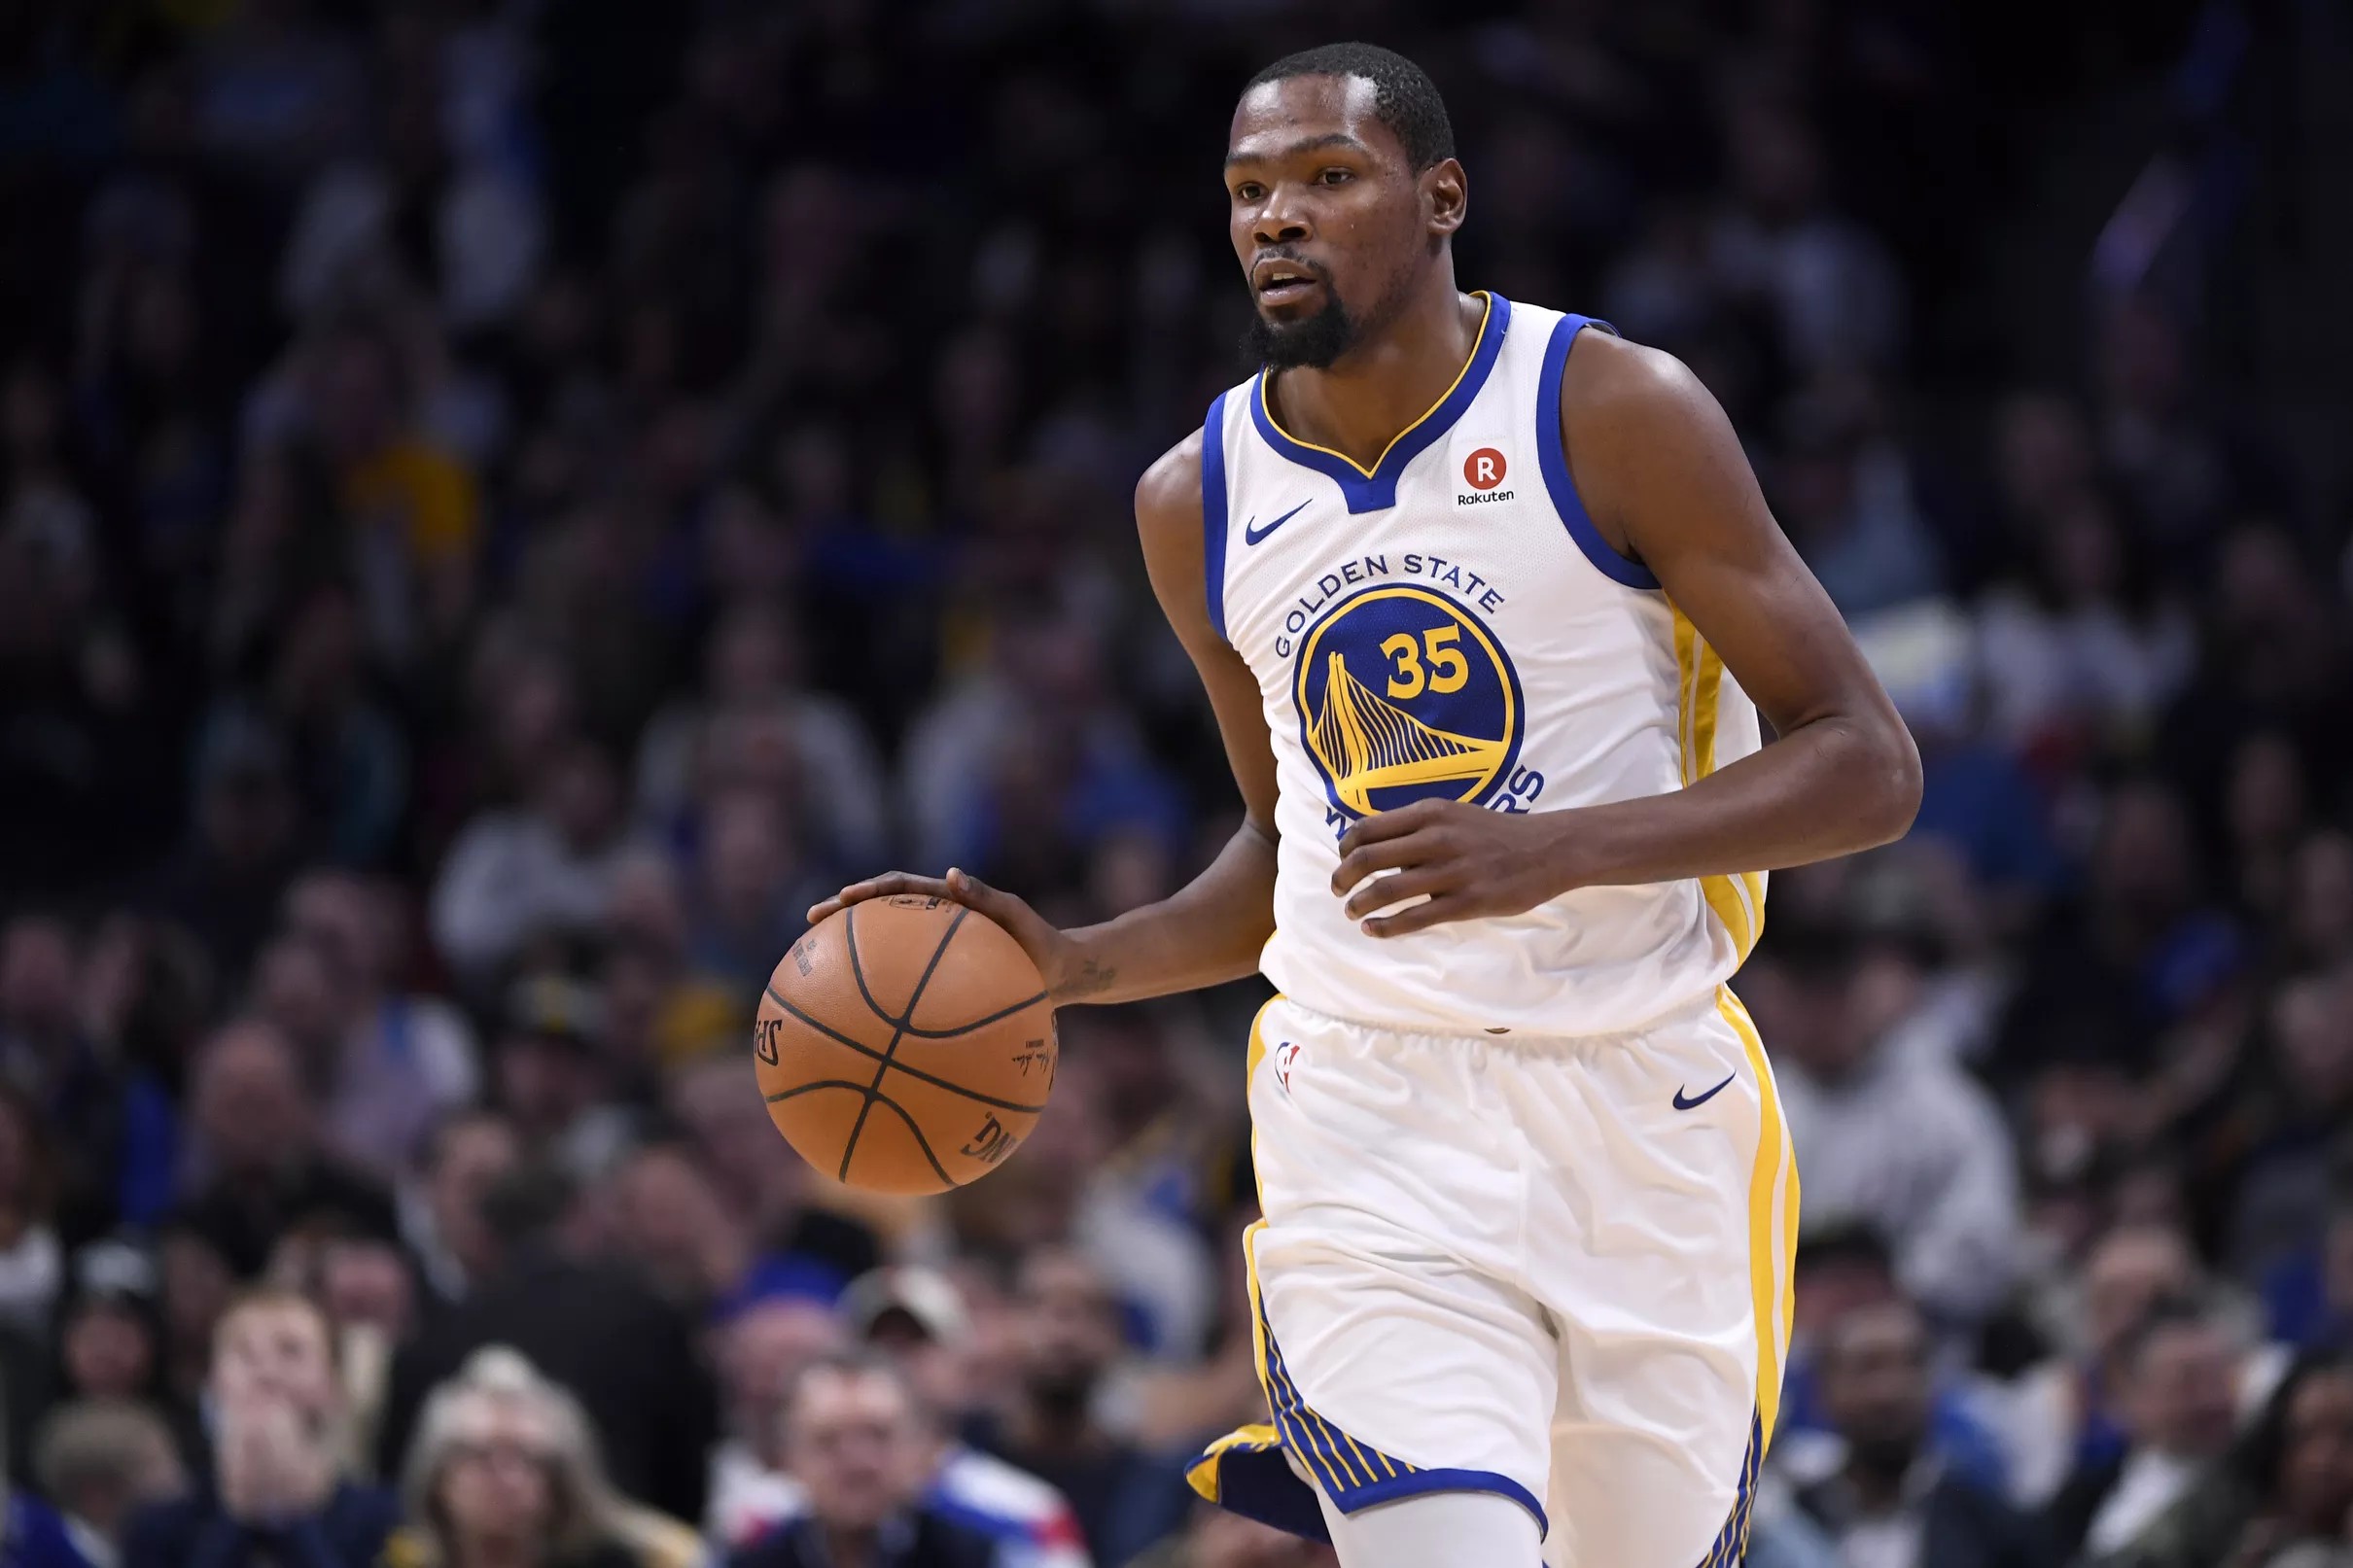 Kevin durant is a star nba basketball player who currently plays for the go...